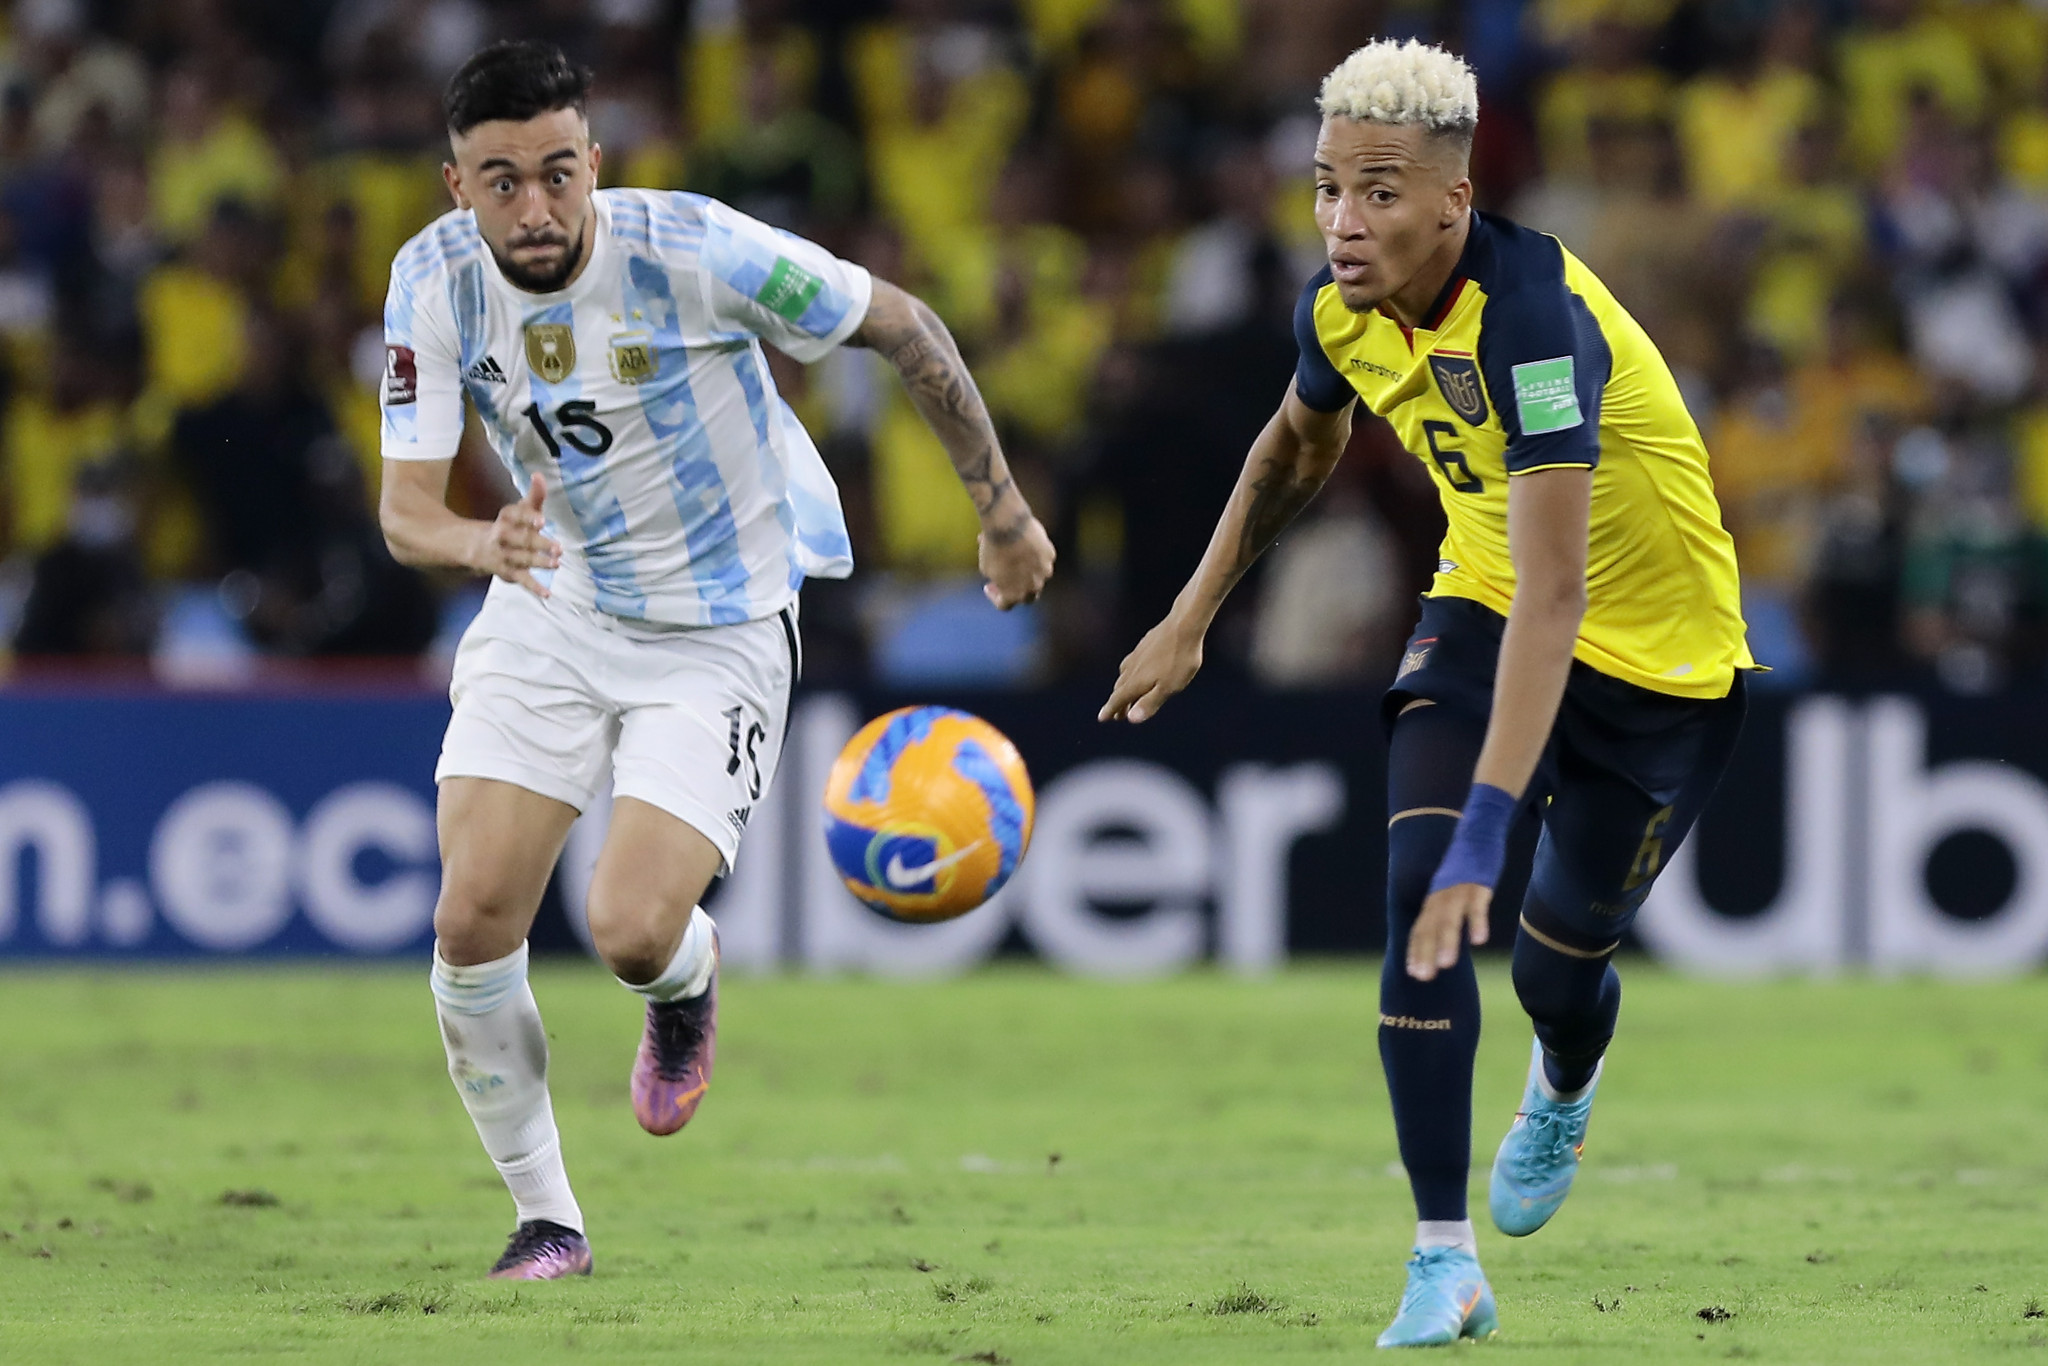 FIFA Disciplinary Committee investigating claim Ecuador used ineligible player in reaching World Cup